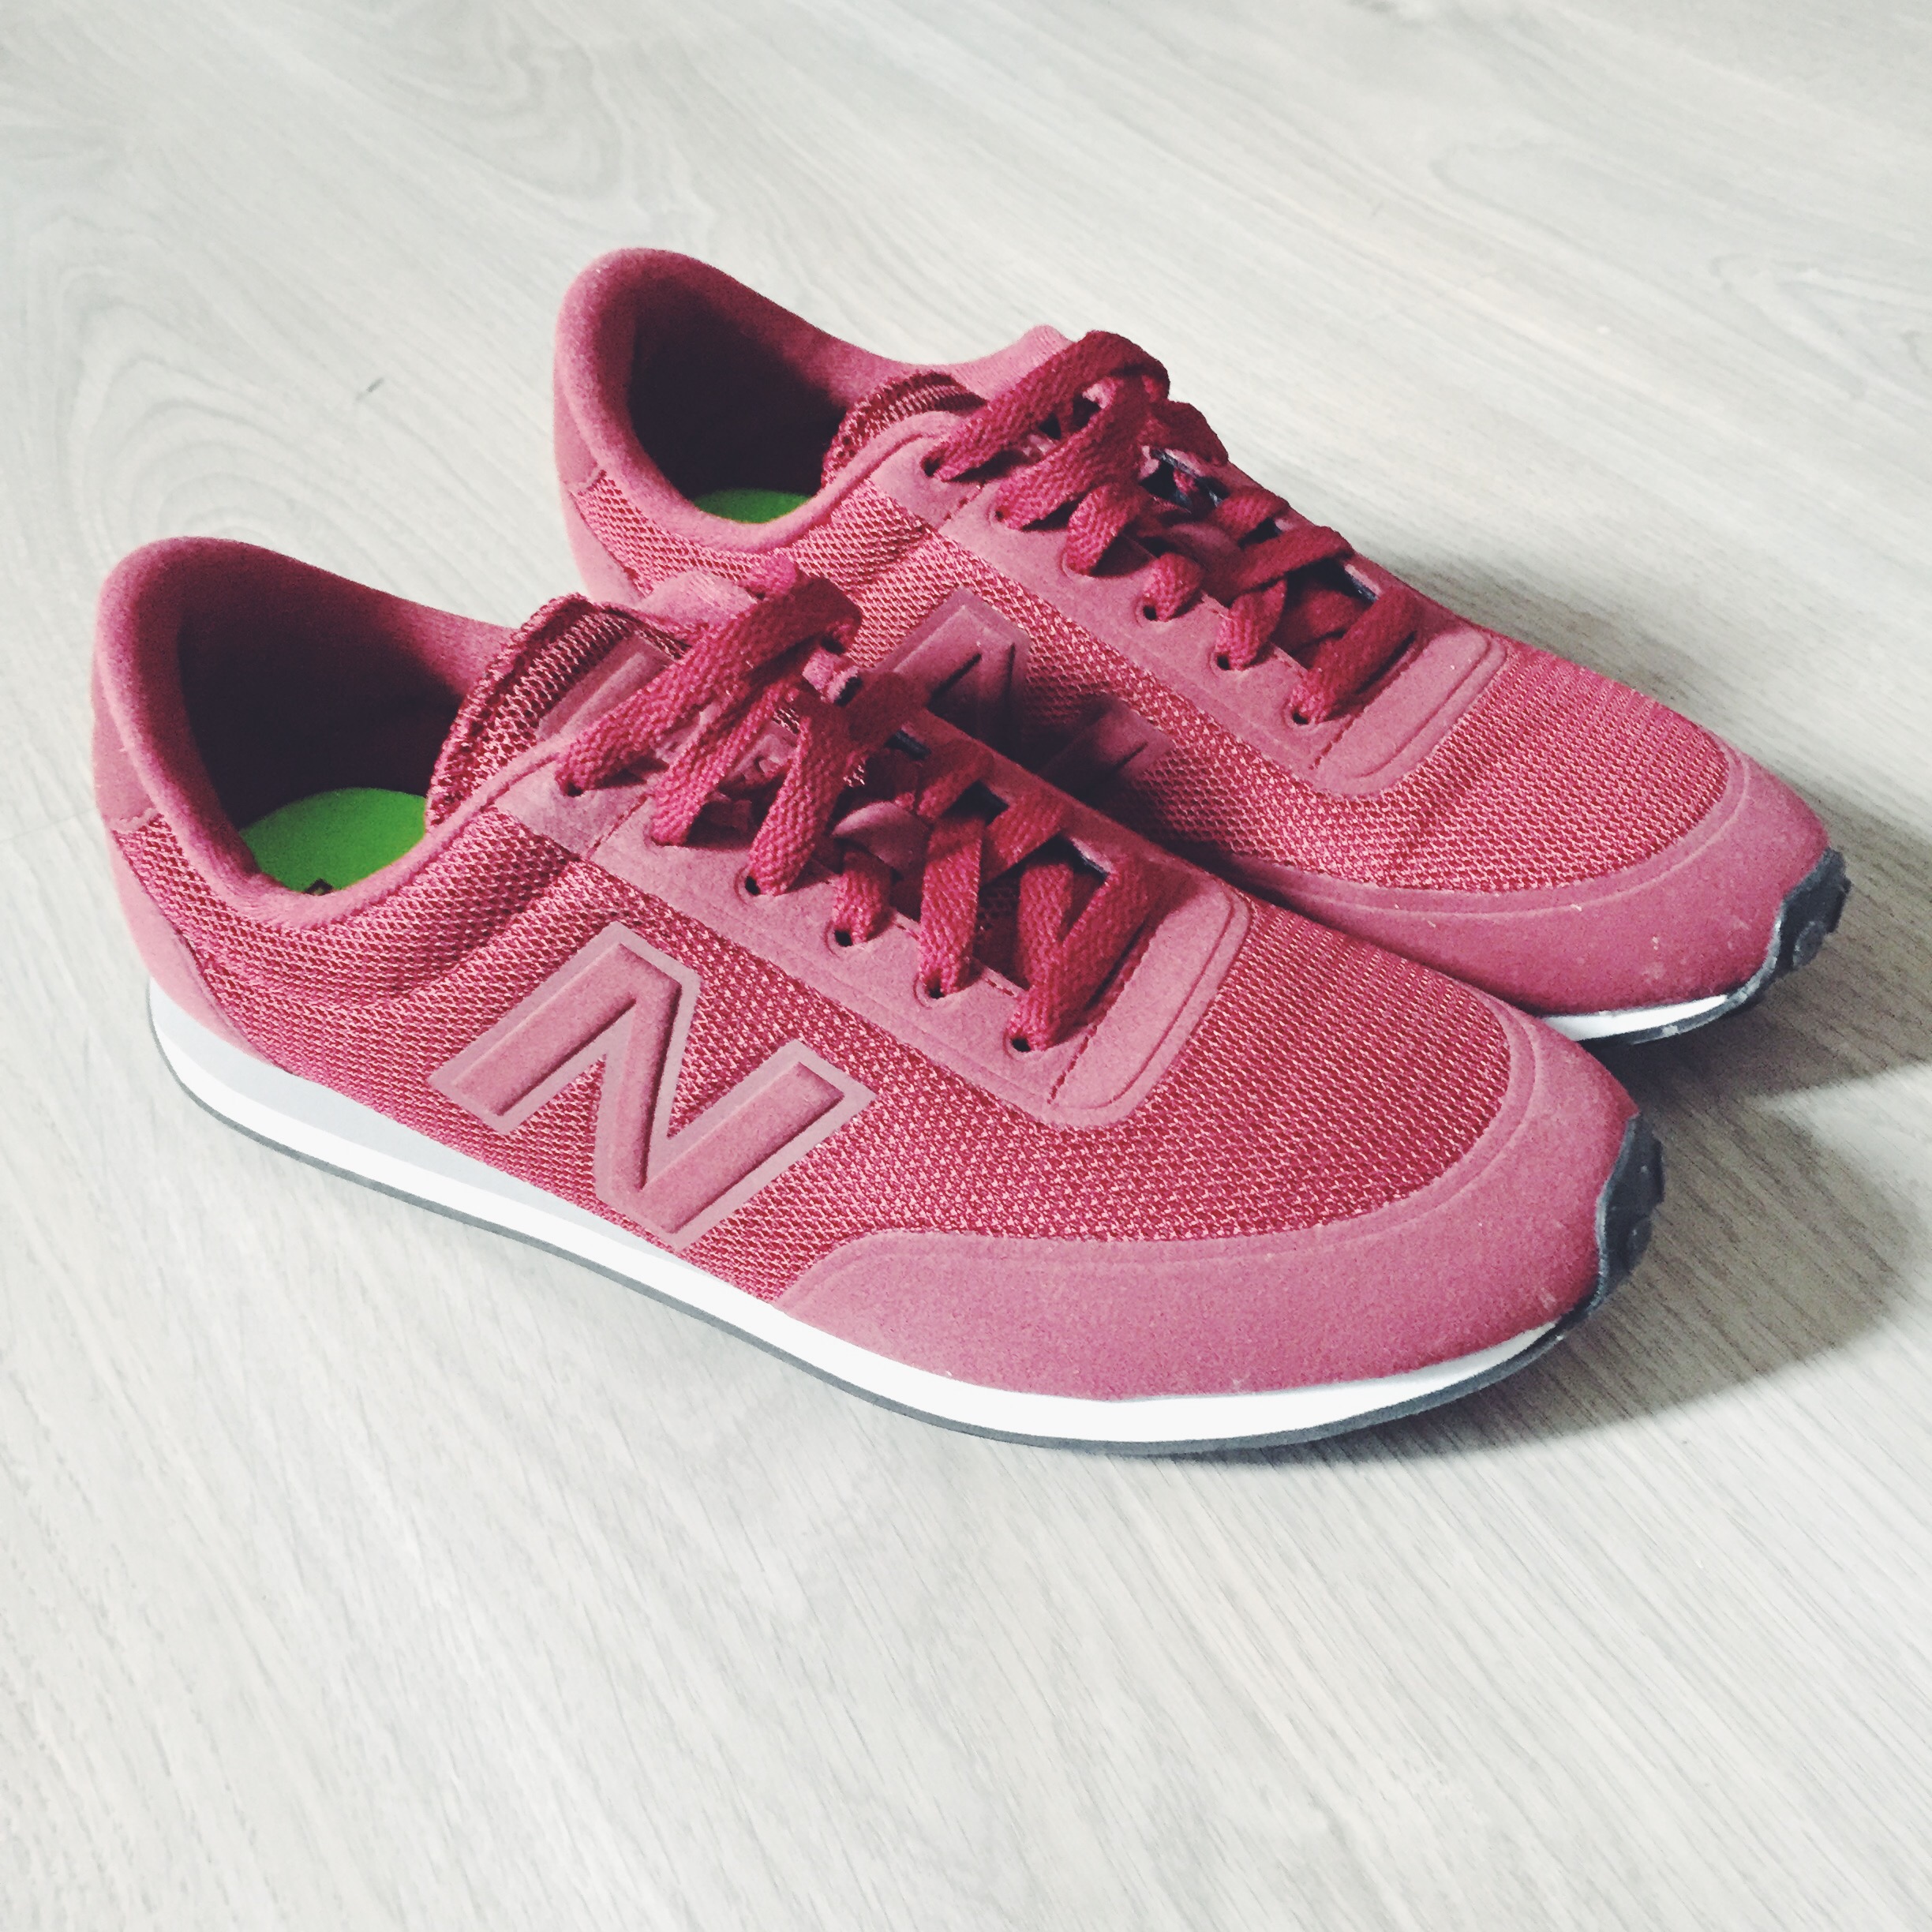 New Balance From UO Europe